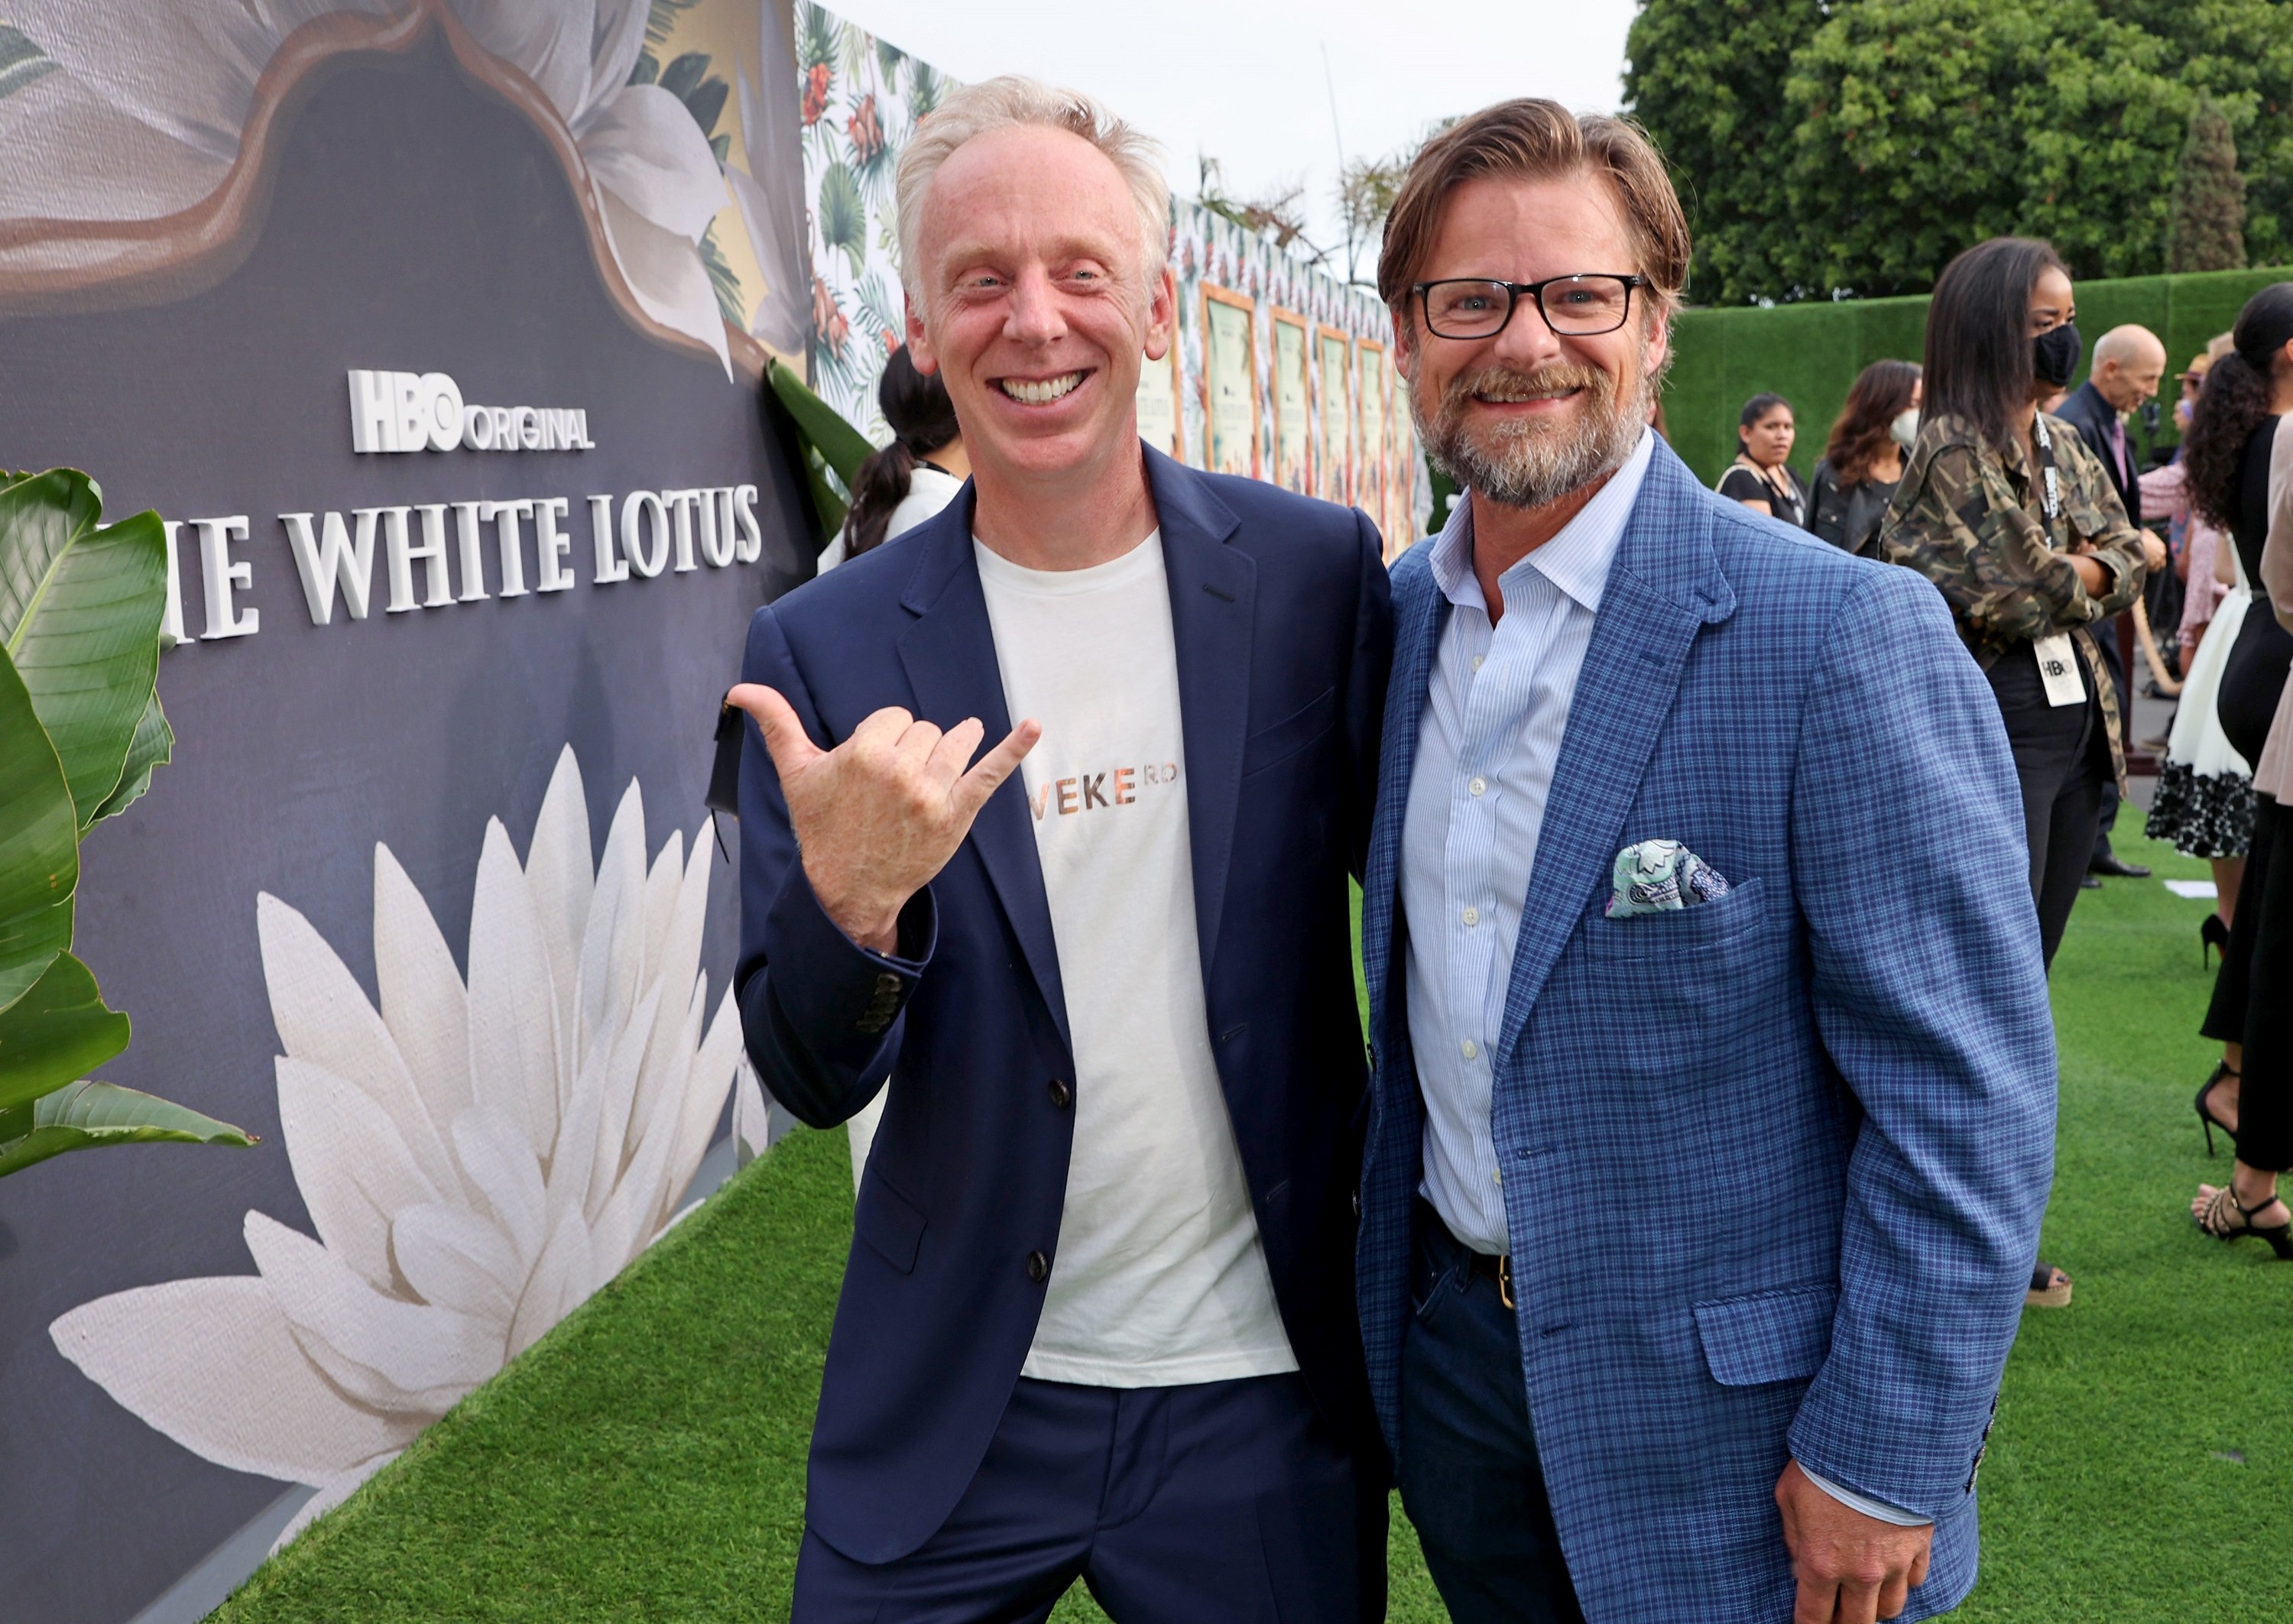 Director Mike White and actor Steve Zahn smiling for photographers at The White Lotus premiere